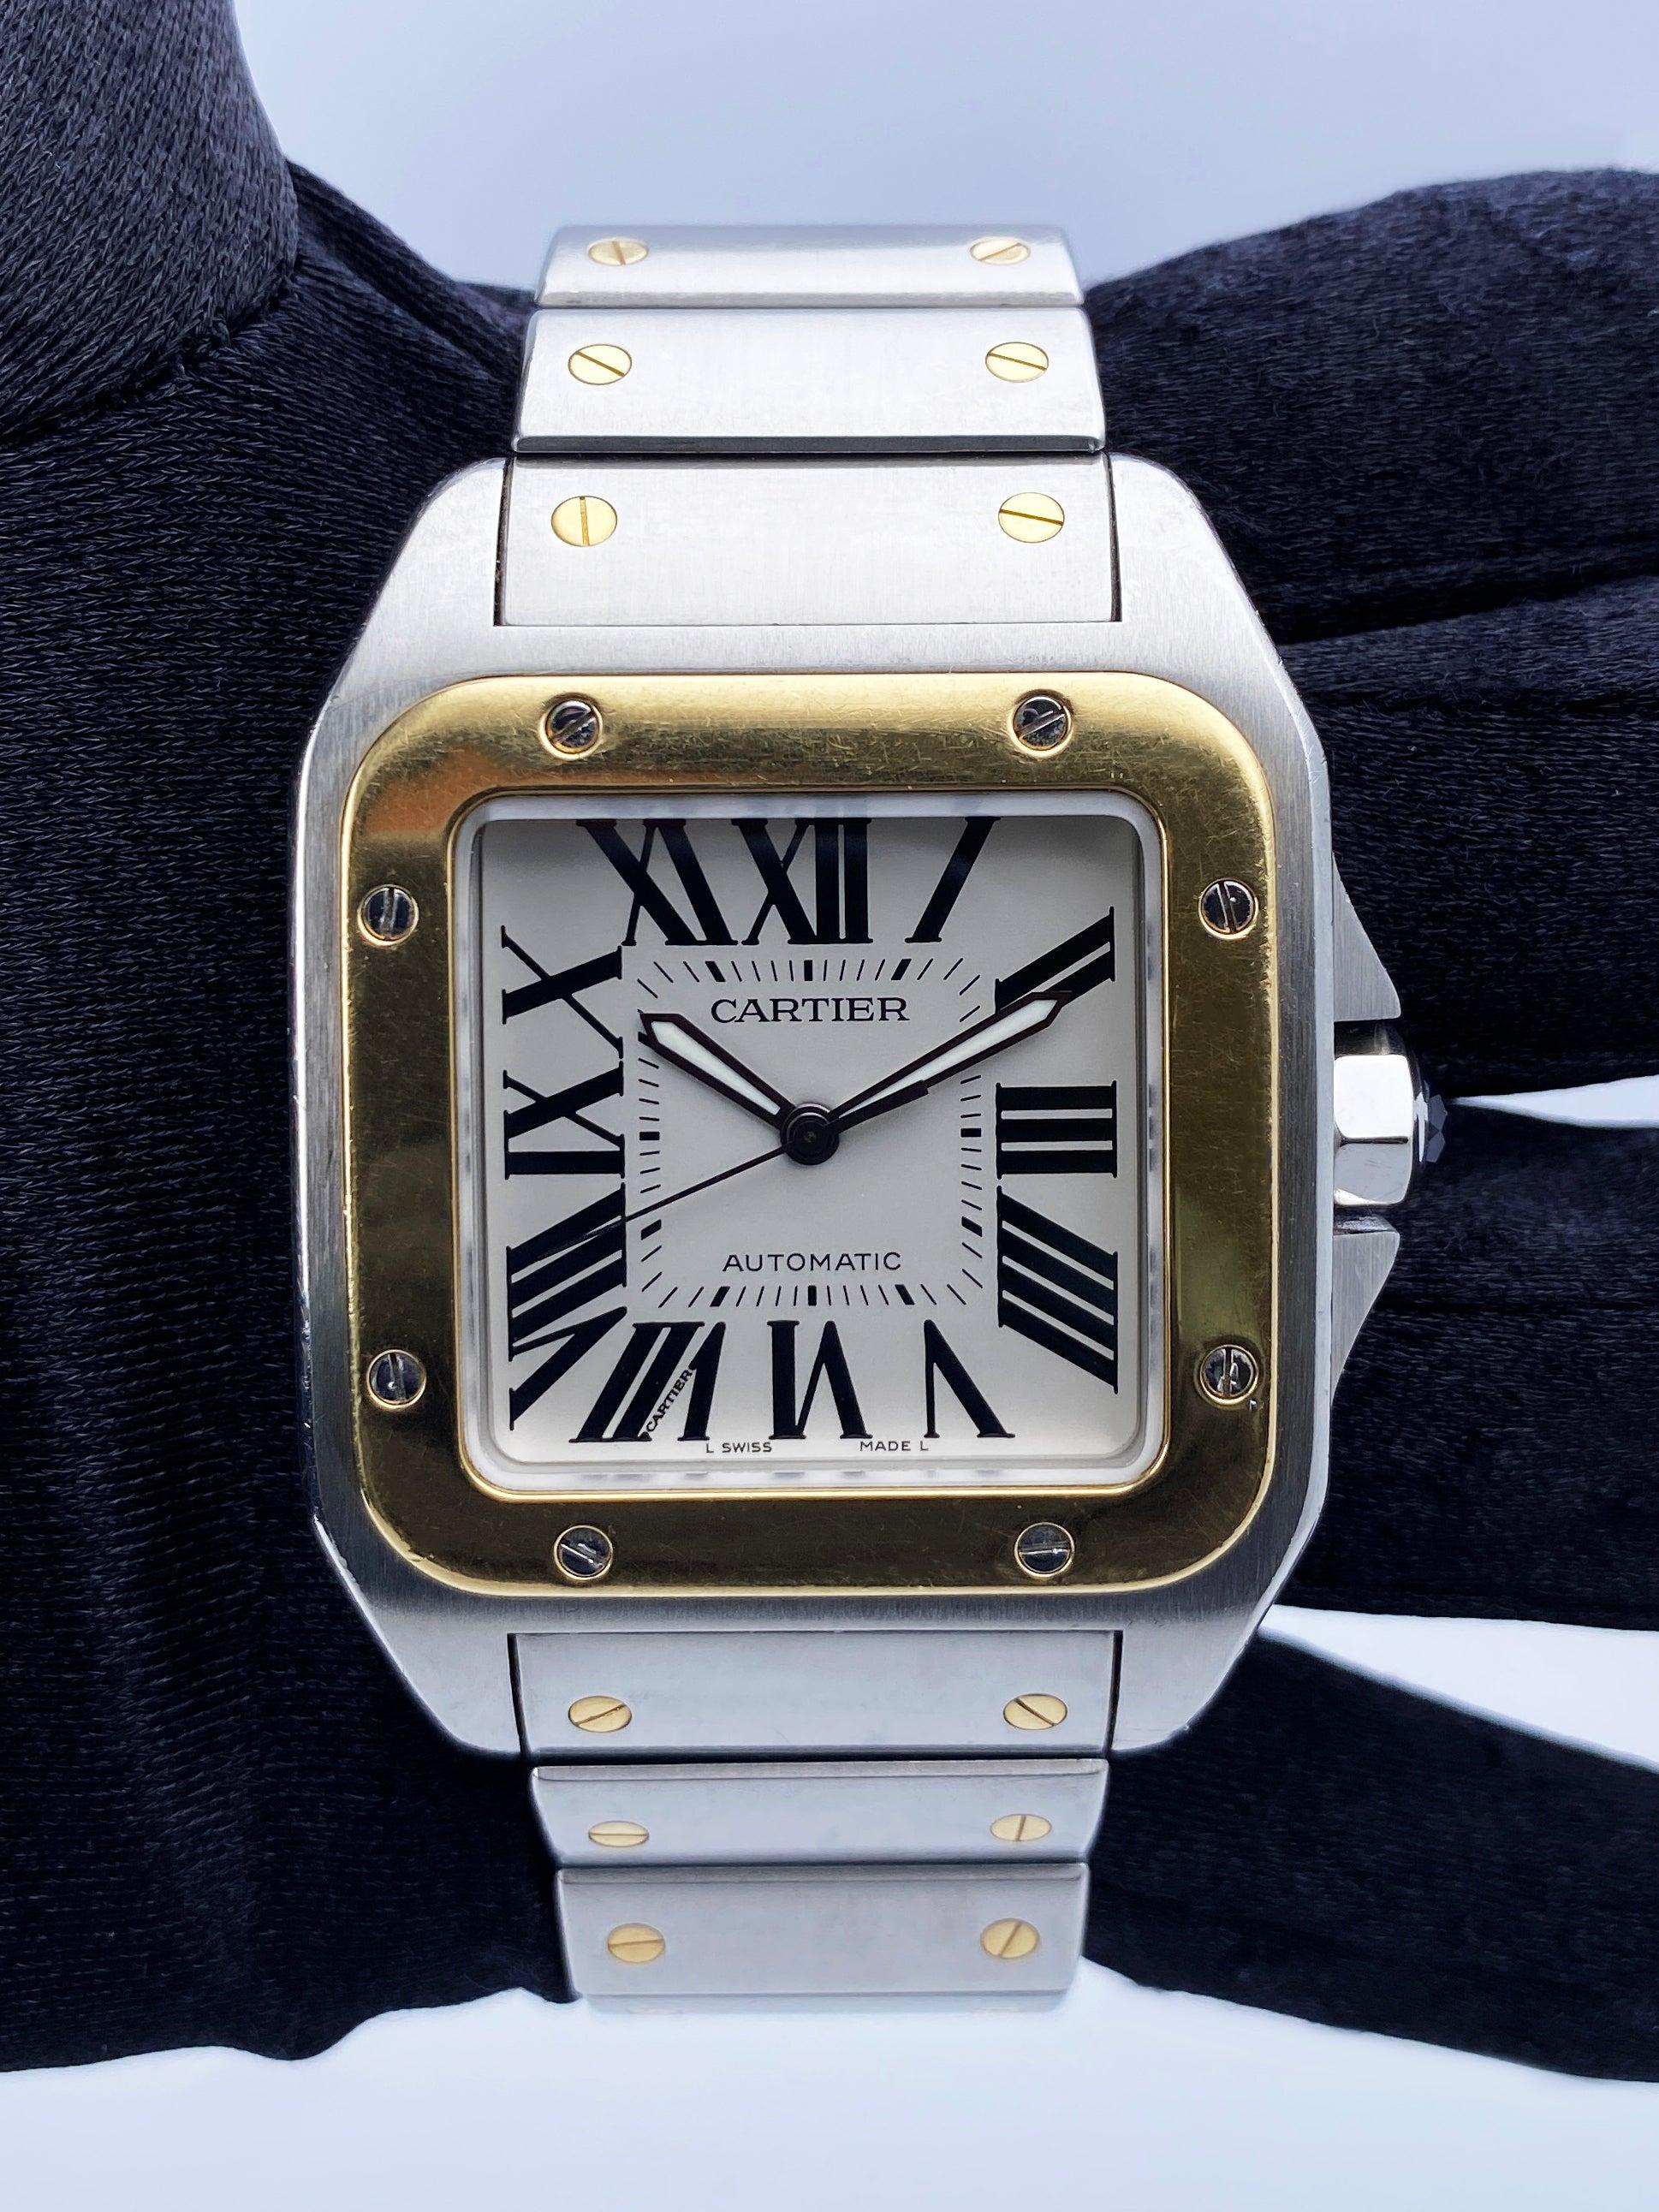 Cartier Santos-100 W200728G Mens Watch. 38mm stainless steel case with 18K yellow gold fixed bezel. Silver dial with black steel luminous hands and black Roman numeral hour markers. Minute markers on the inner dial. Will fit up to a 6.75-inch wrist.